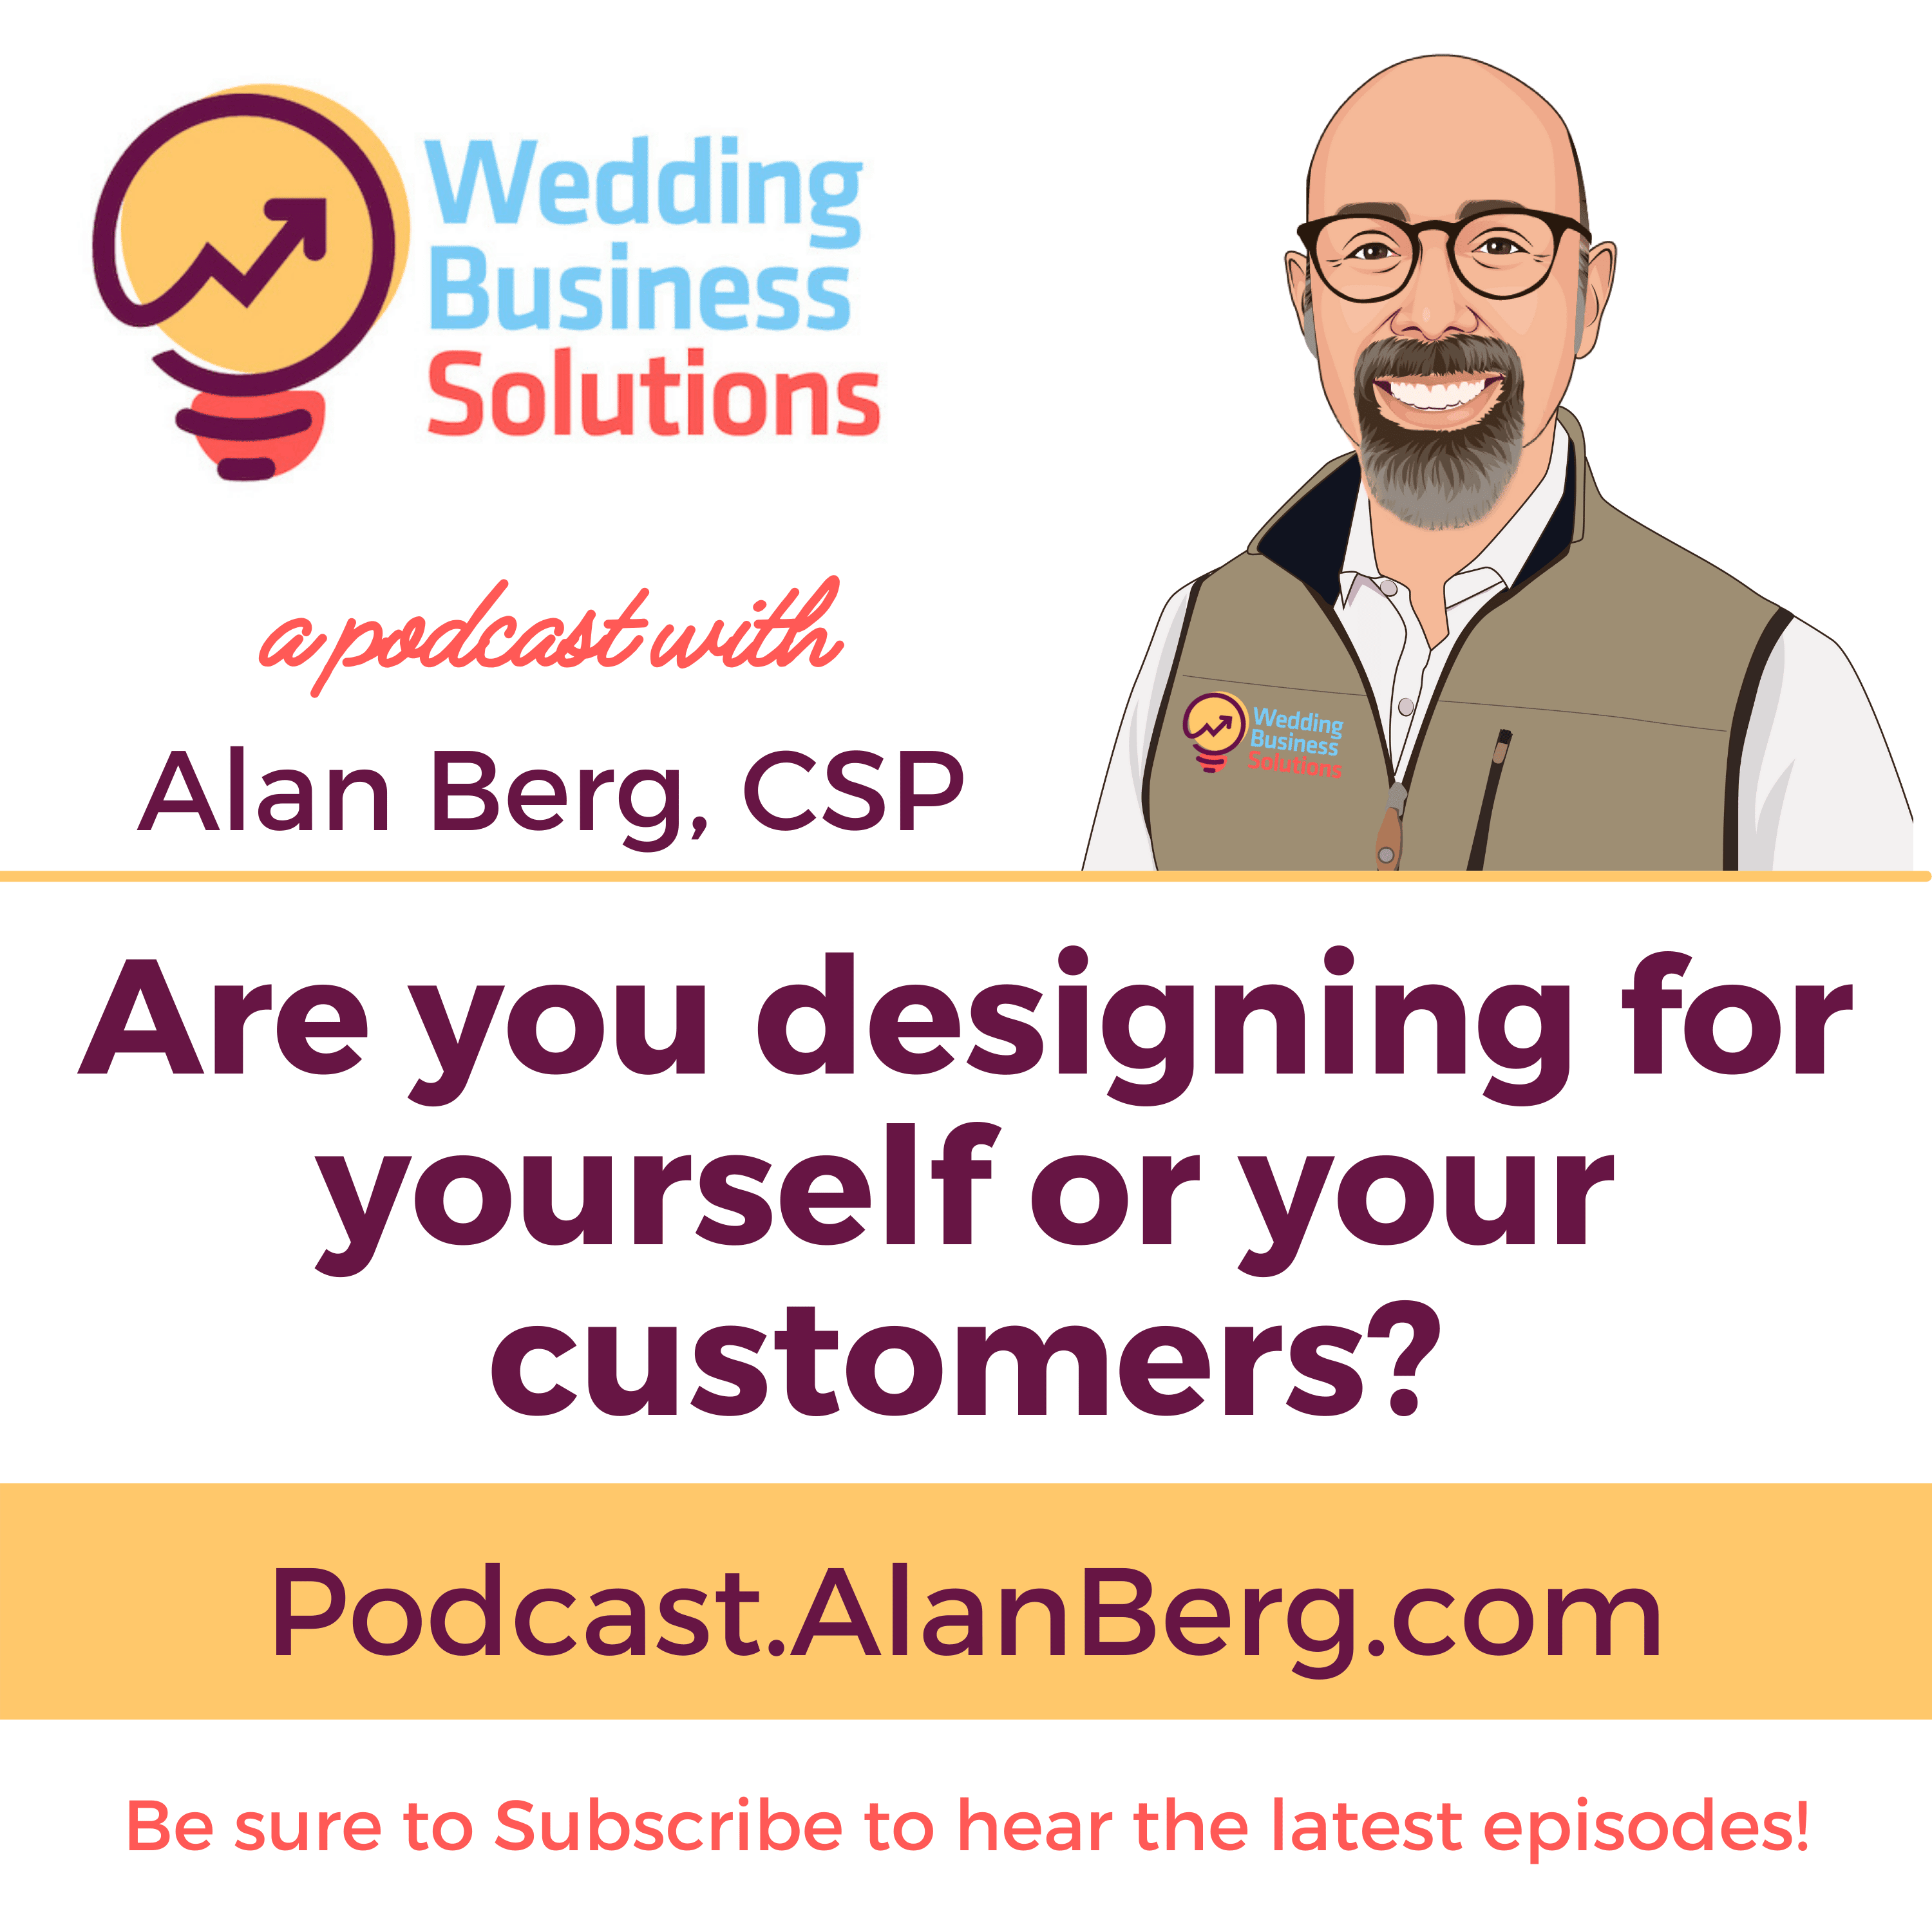 Are you designing for yourself or your customers? – Podcast Transcript